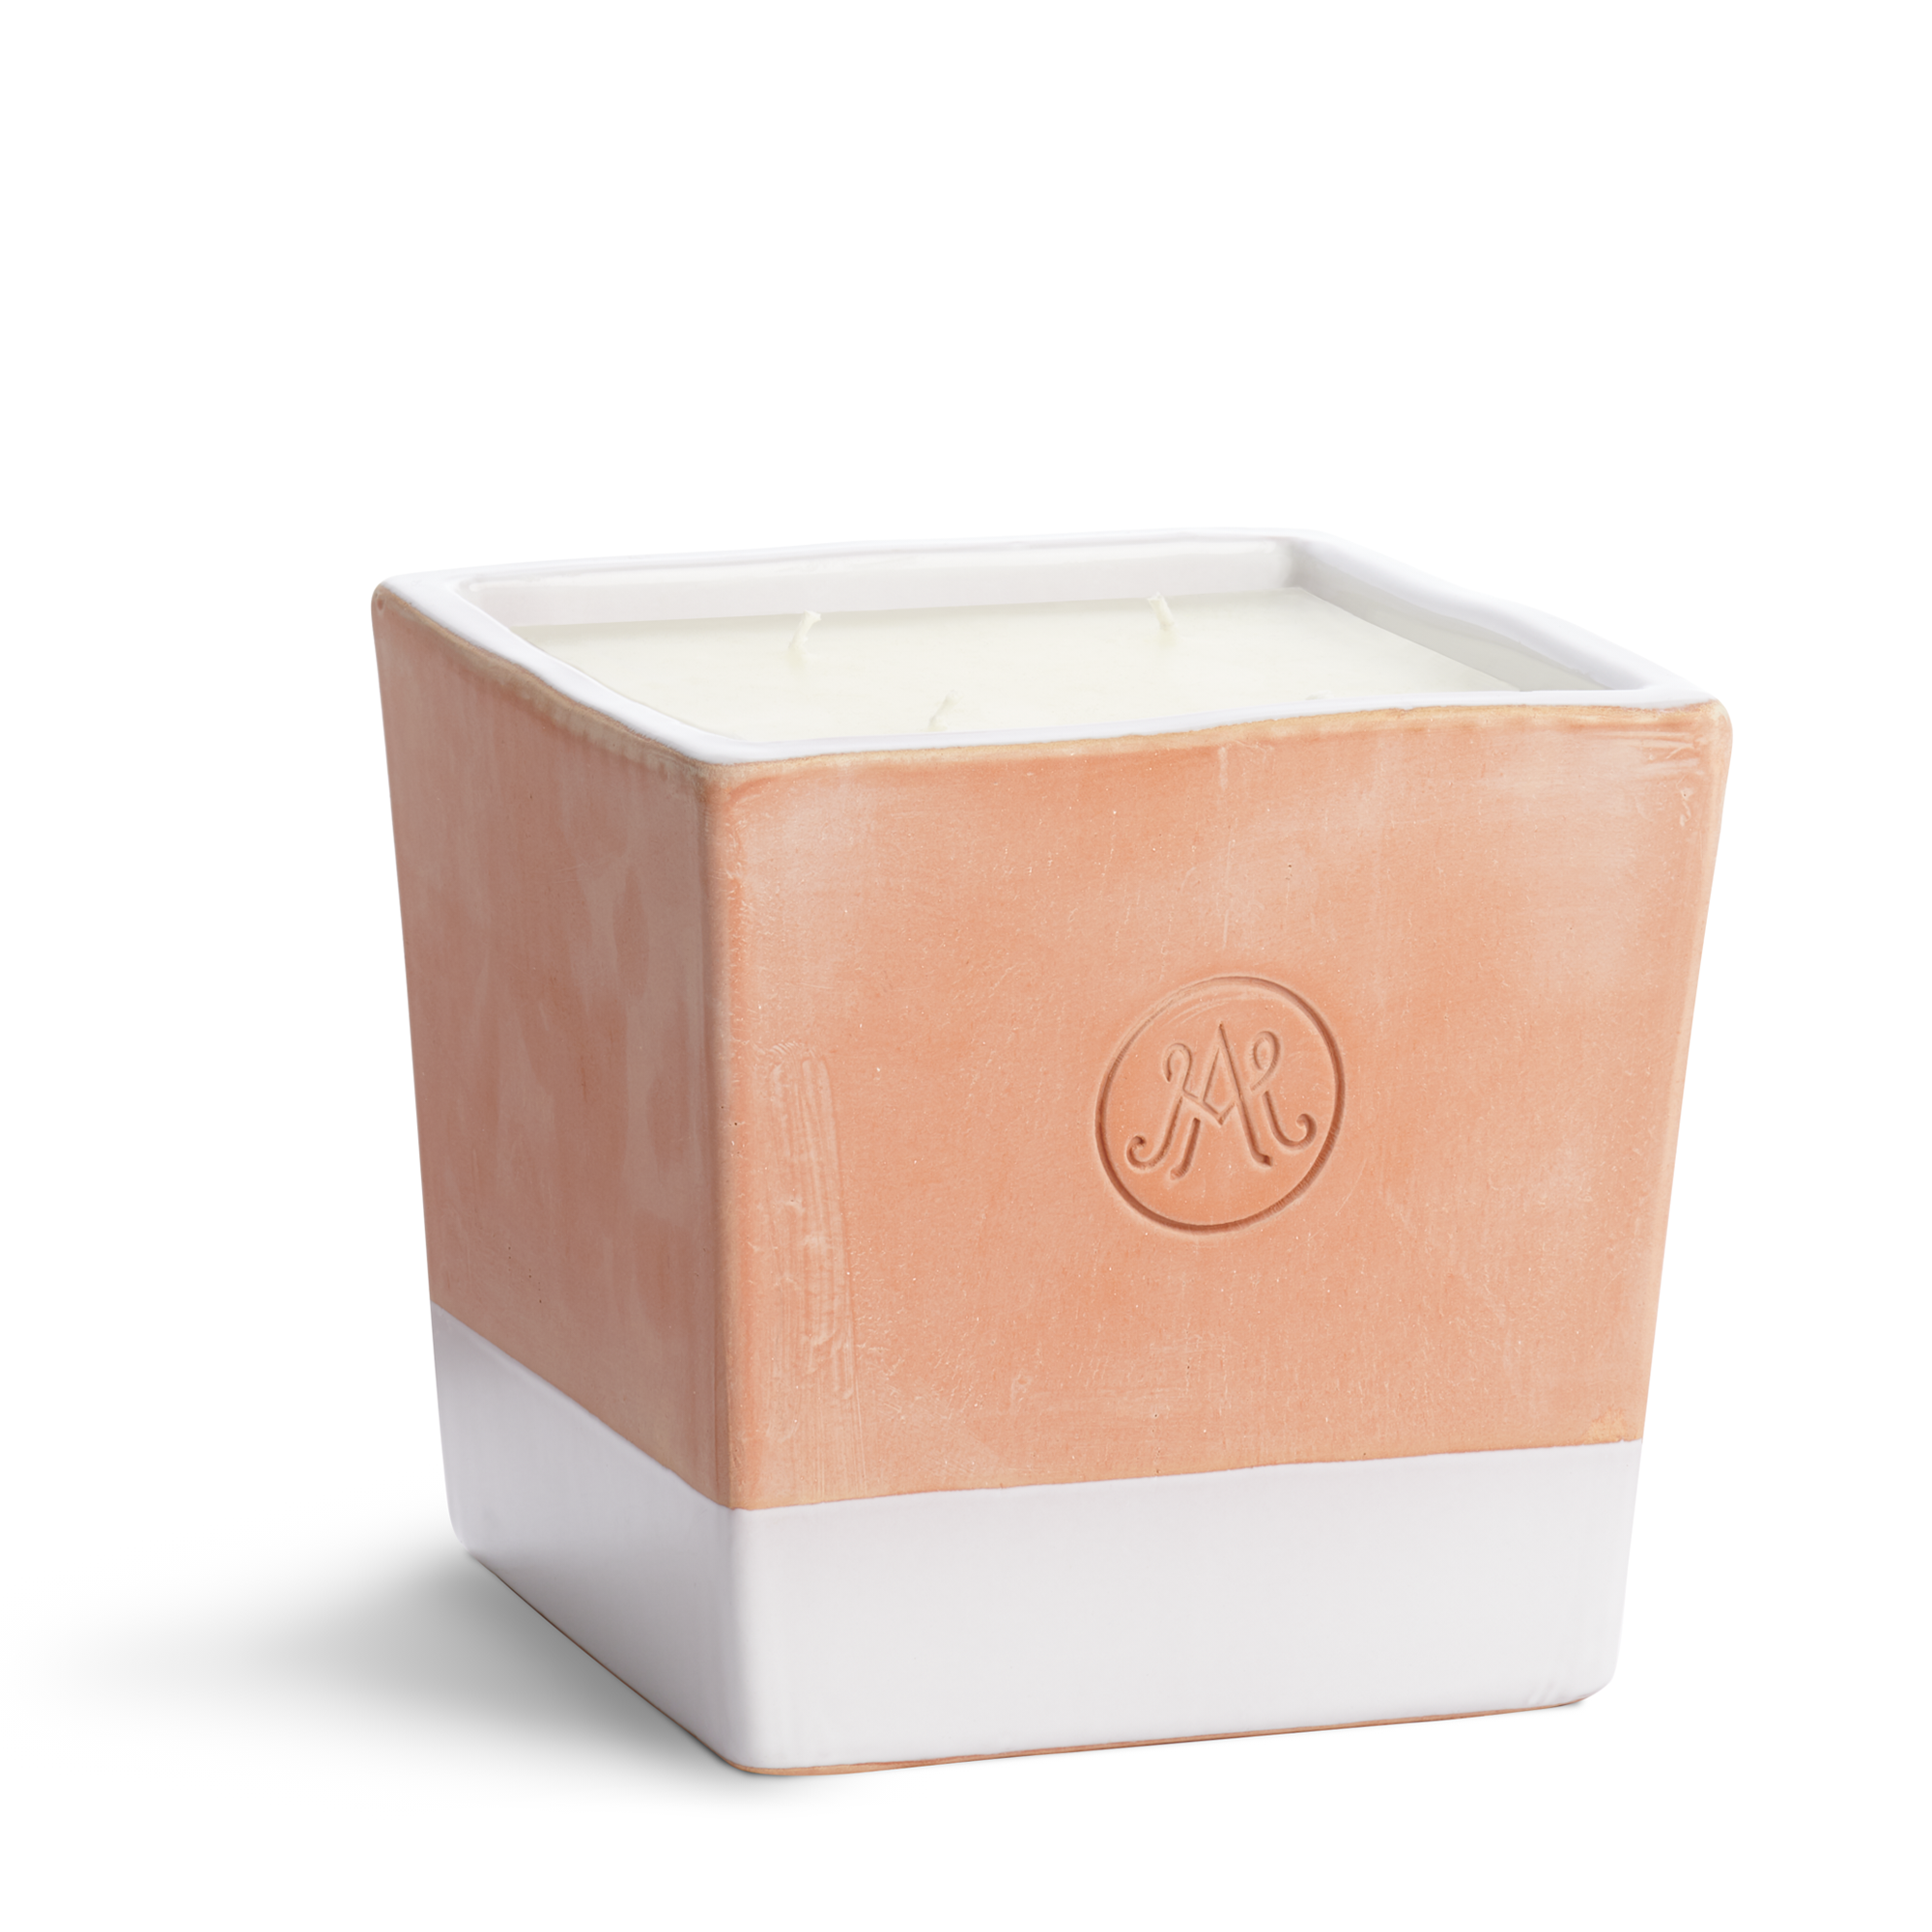 Outdoor Candle in a refillable terracotta and white enamel vessel, scented with a touch of honey and freshly cut grass.